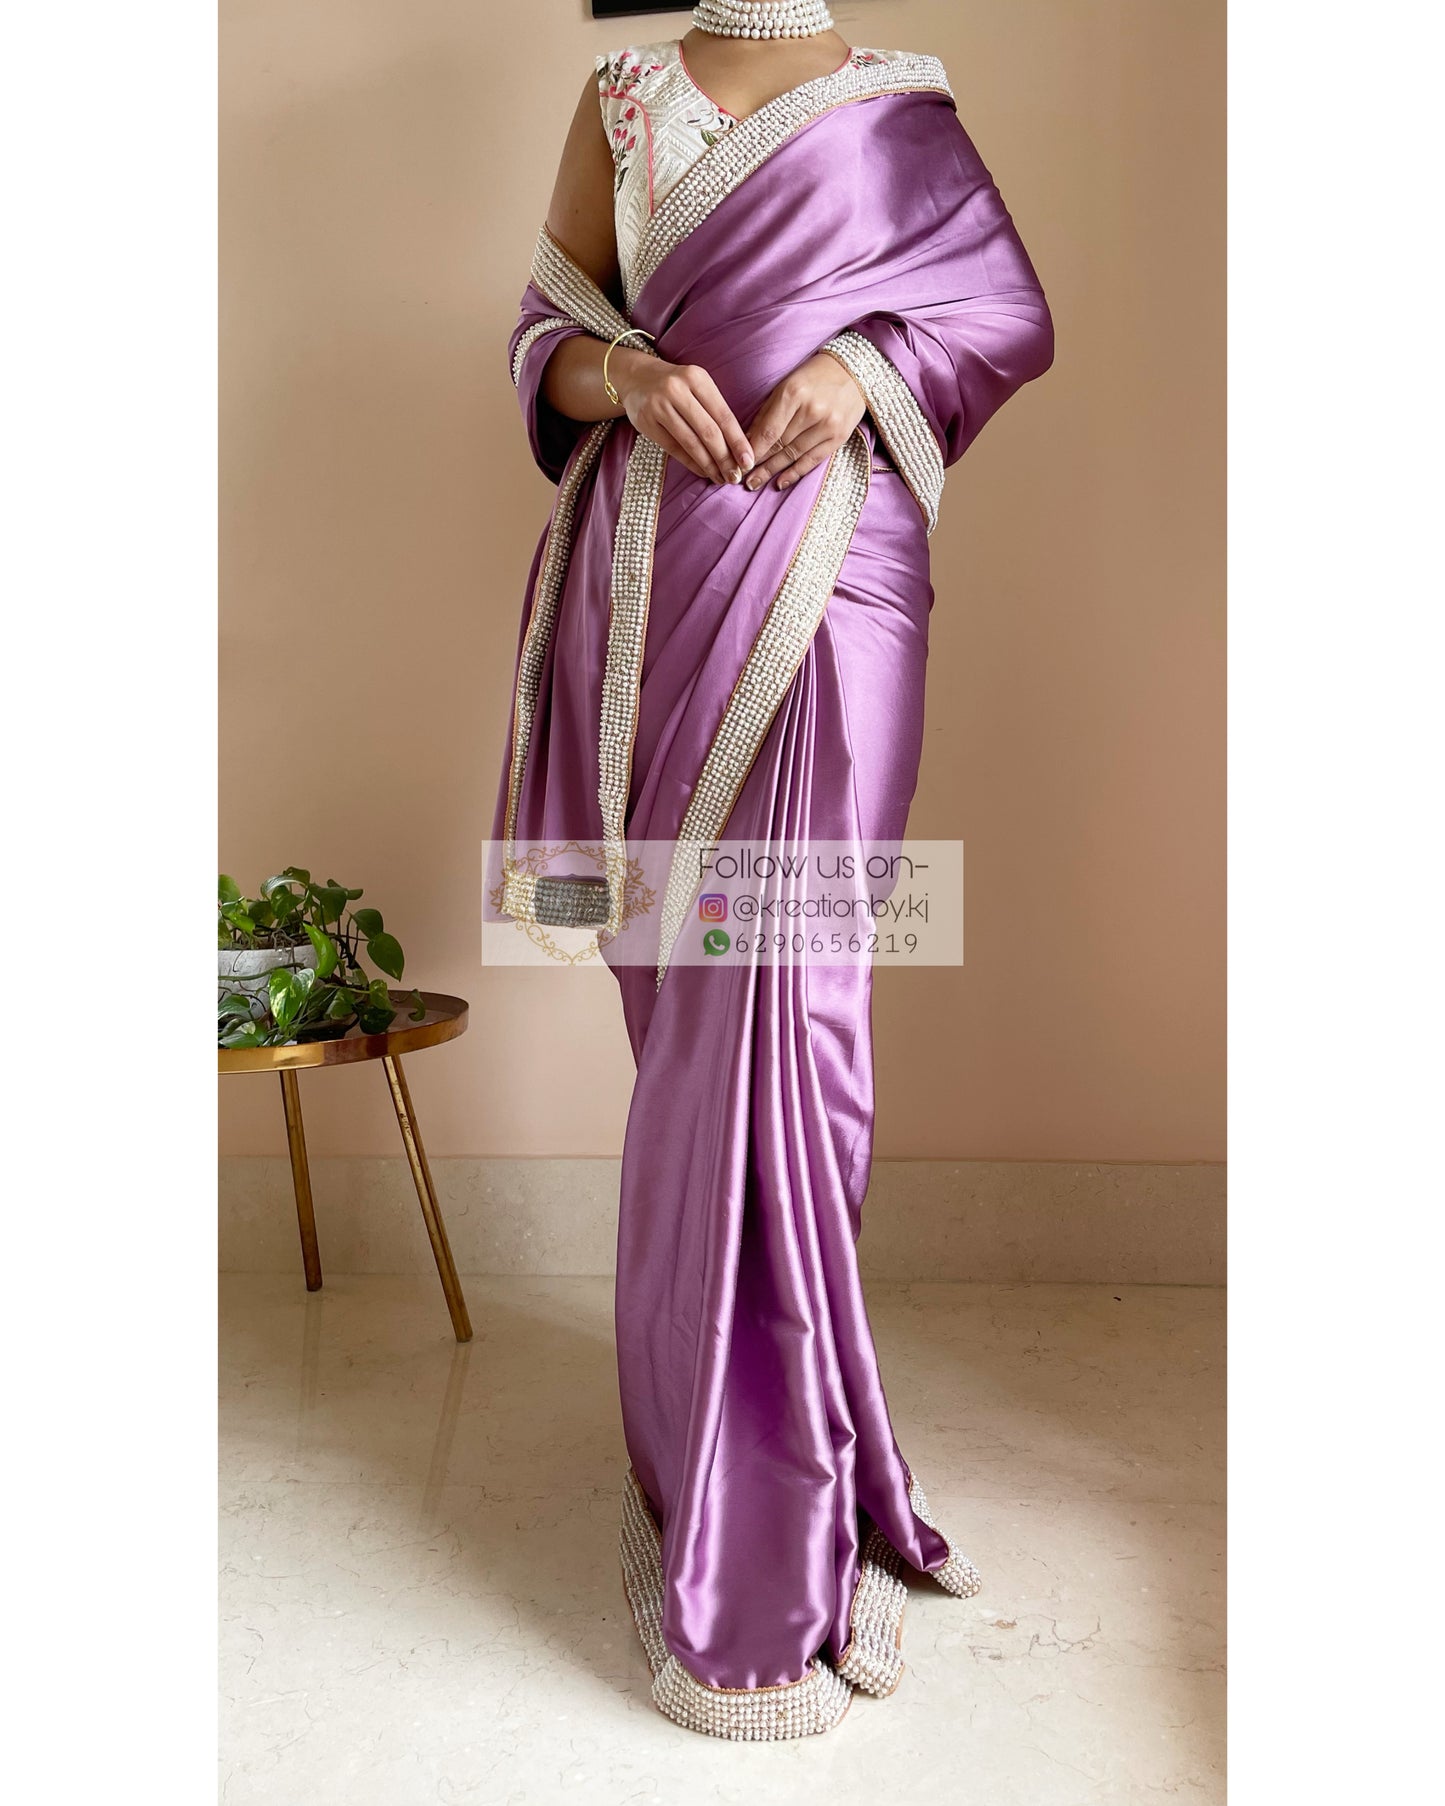 Heather Mother of Pearl Saree - kreationbykj